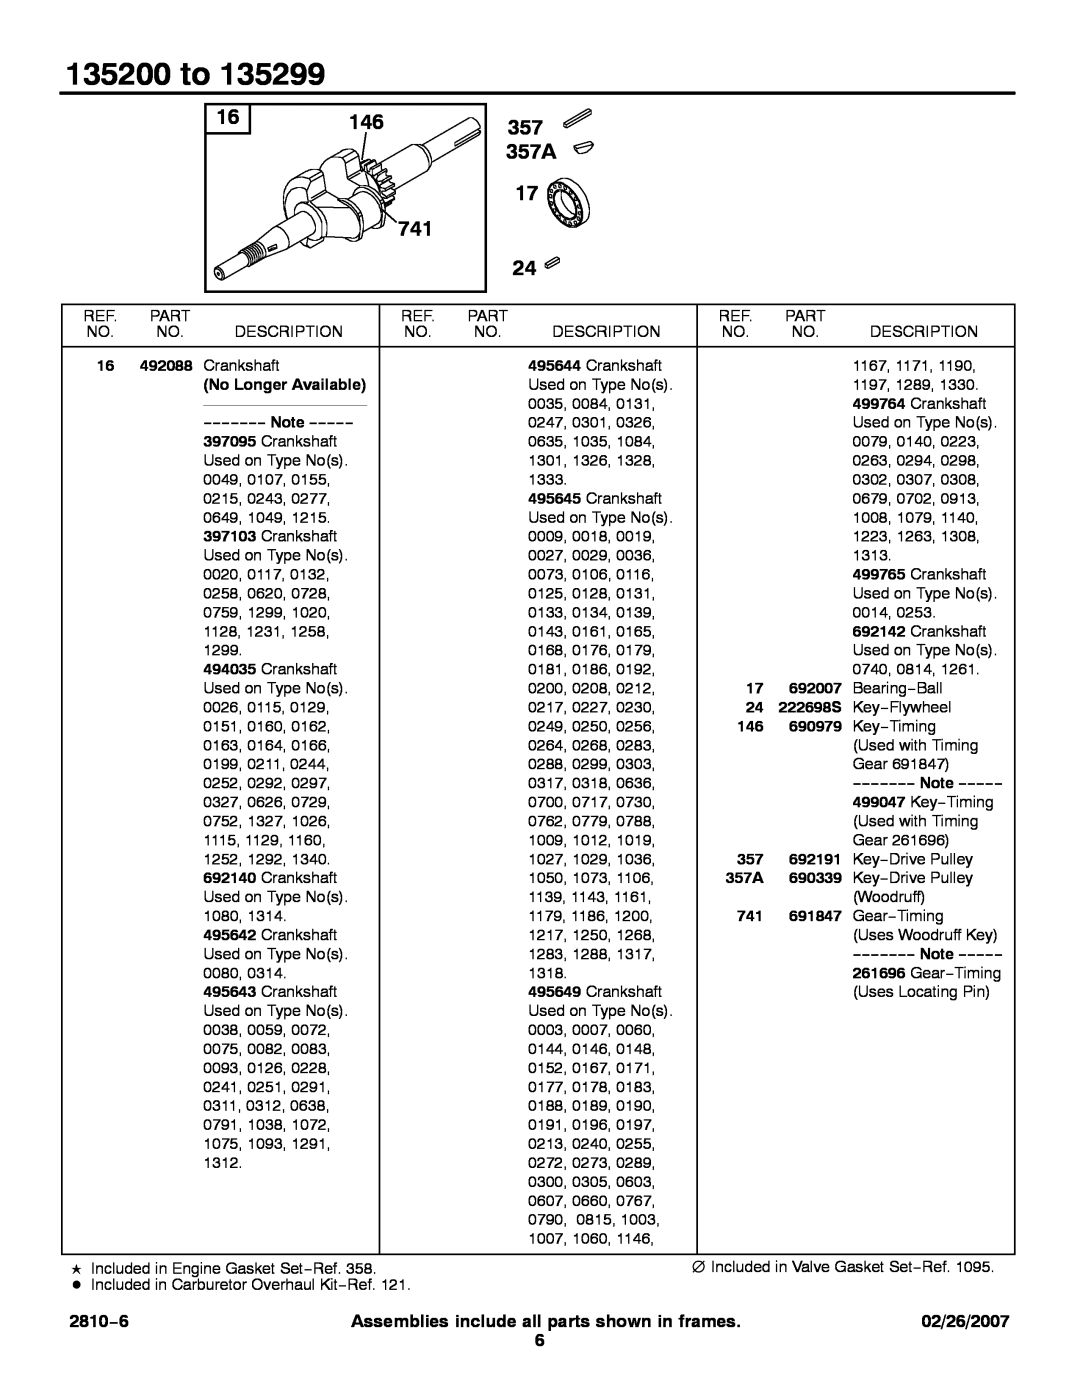 Briggs & Stratton service manual 135200 to, 357A, 2810−6, Assemblies include all parts shown in frames, 02/26/2007 